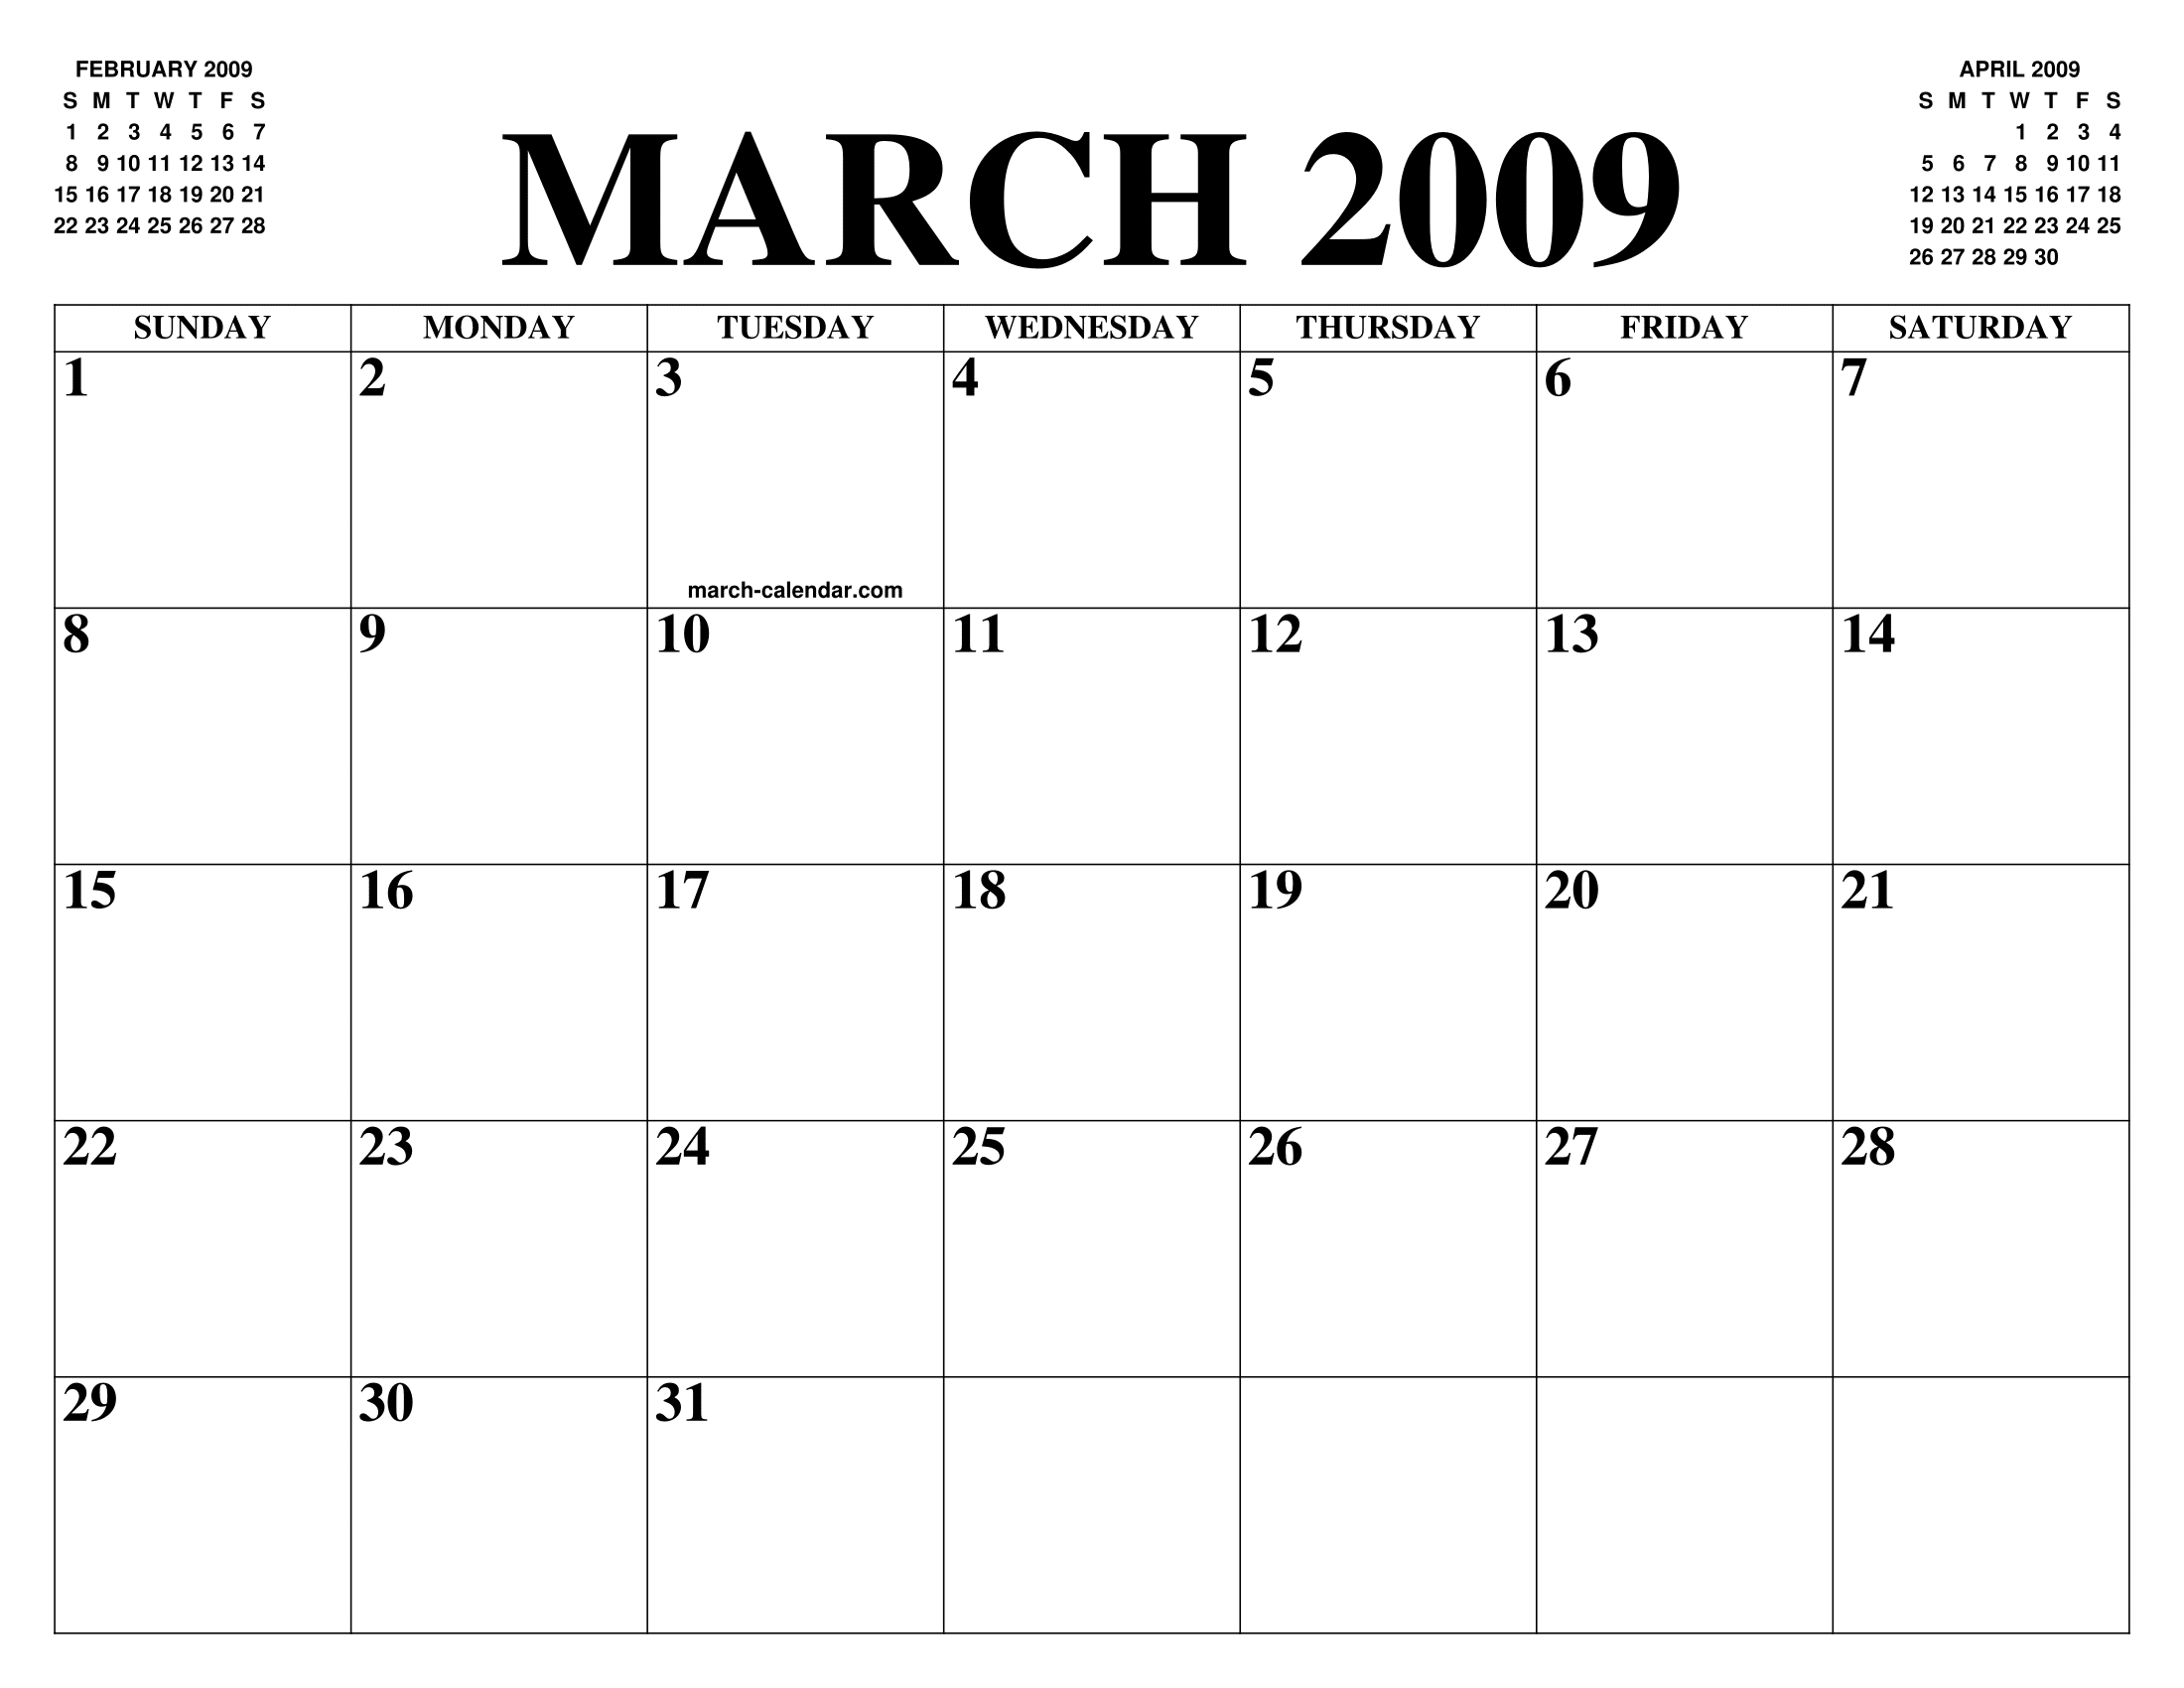 MARCH 2009 CALENDAR OF THE MONTH: FREE PRINTABLE MARCH CALENDAR OF THE